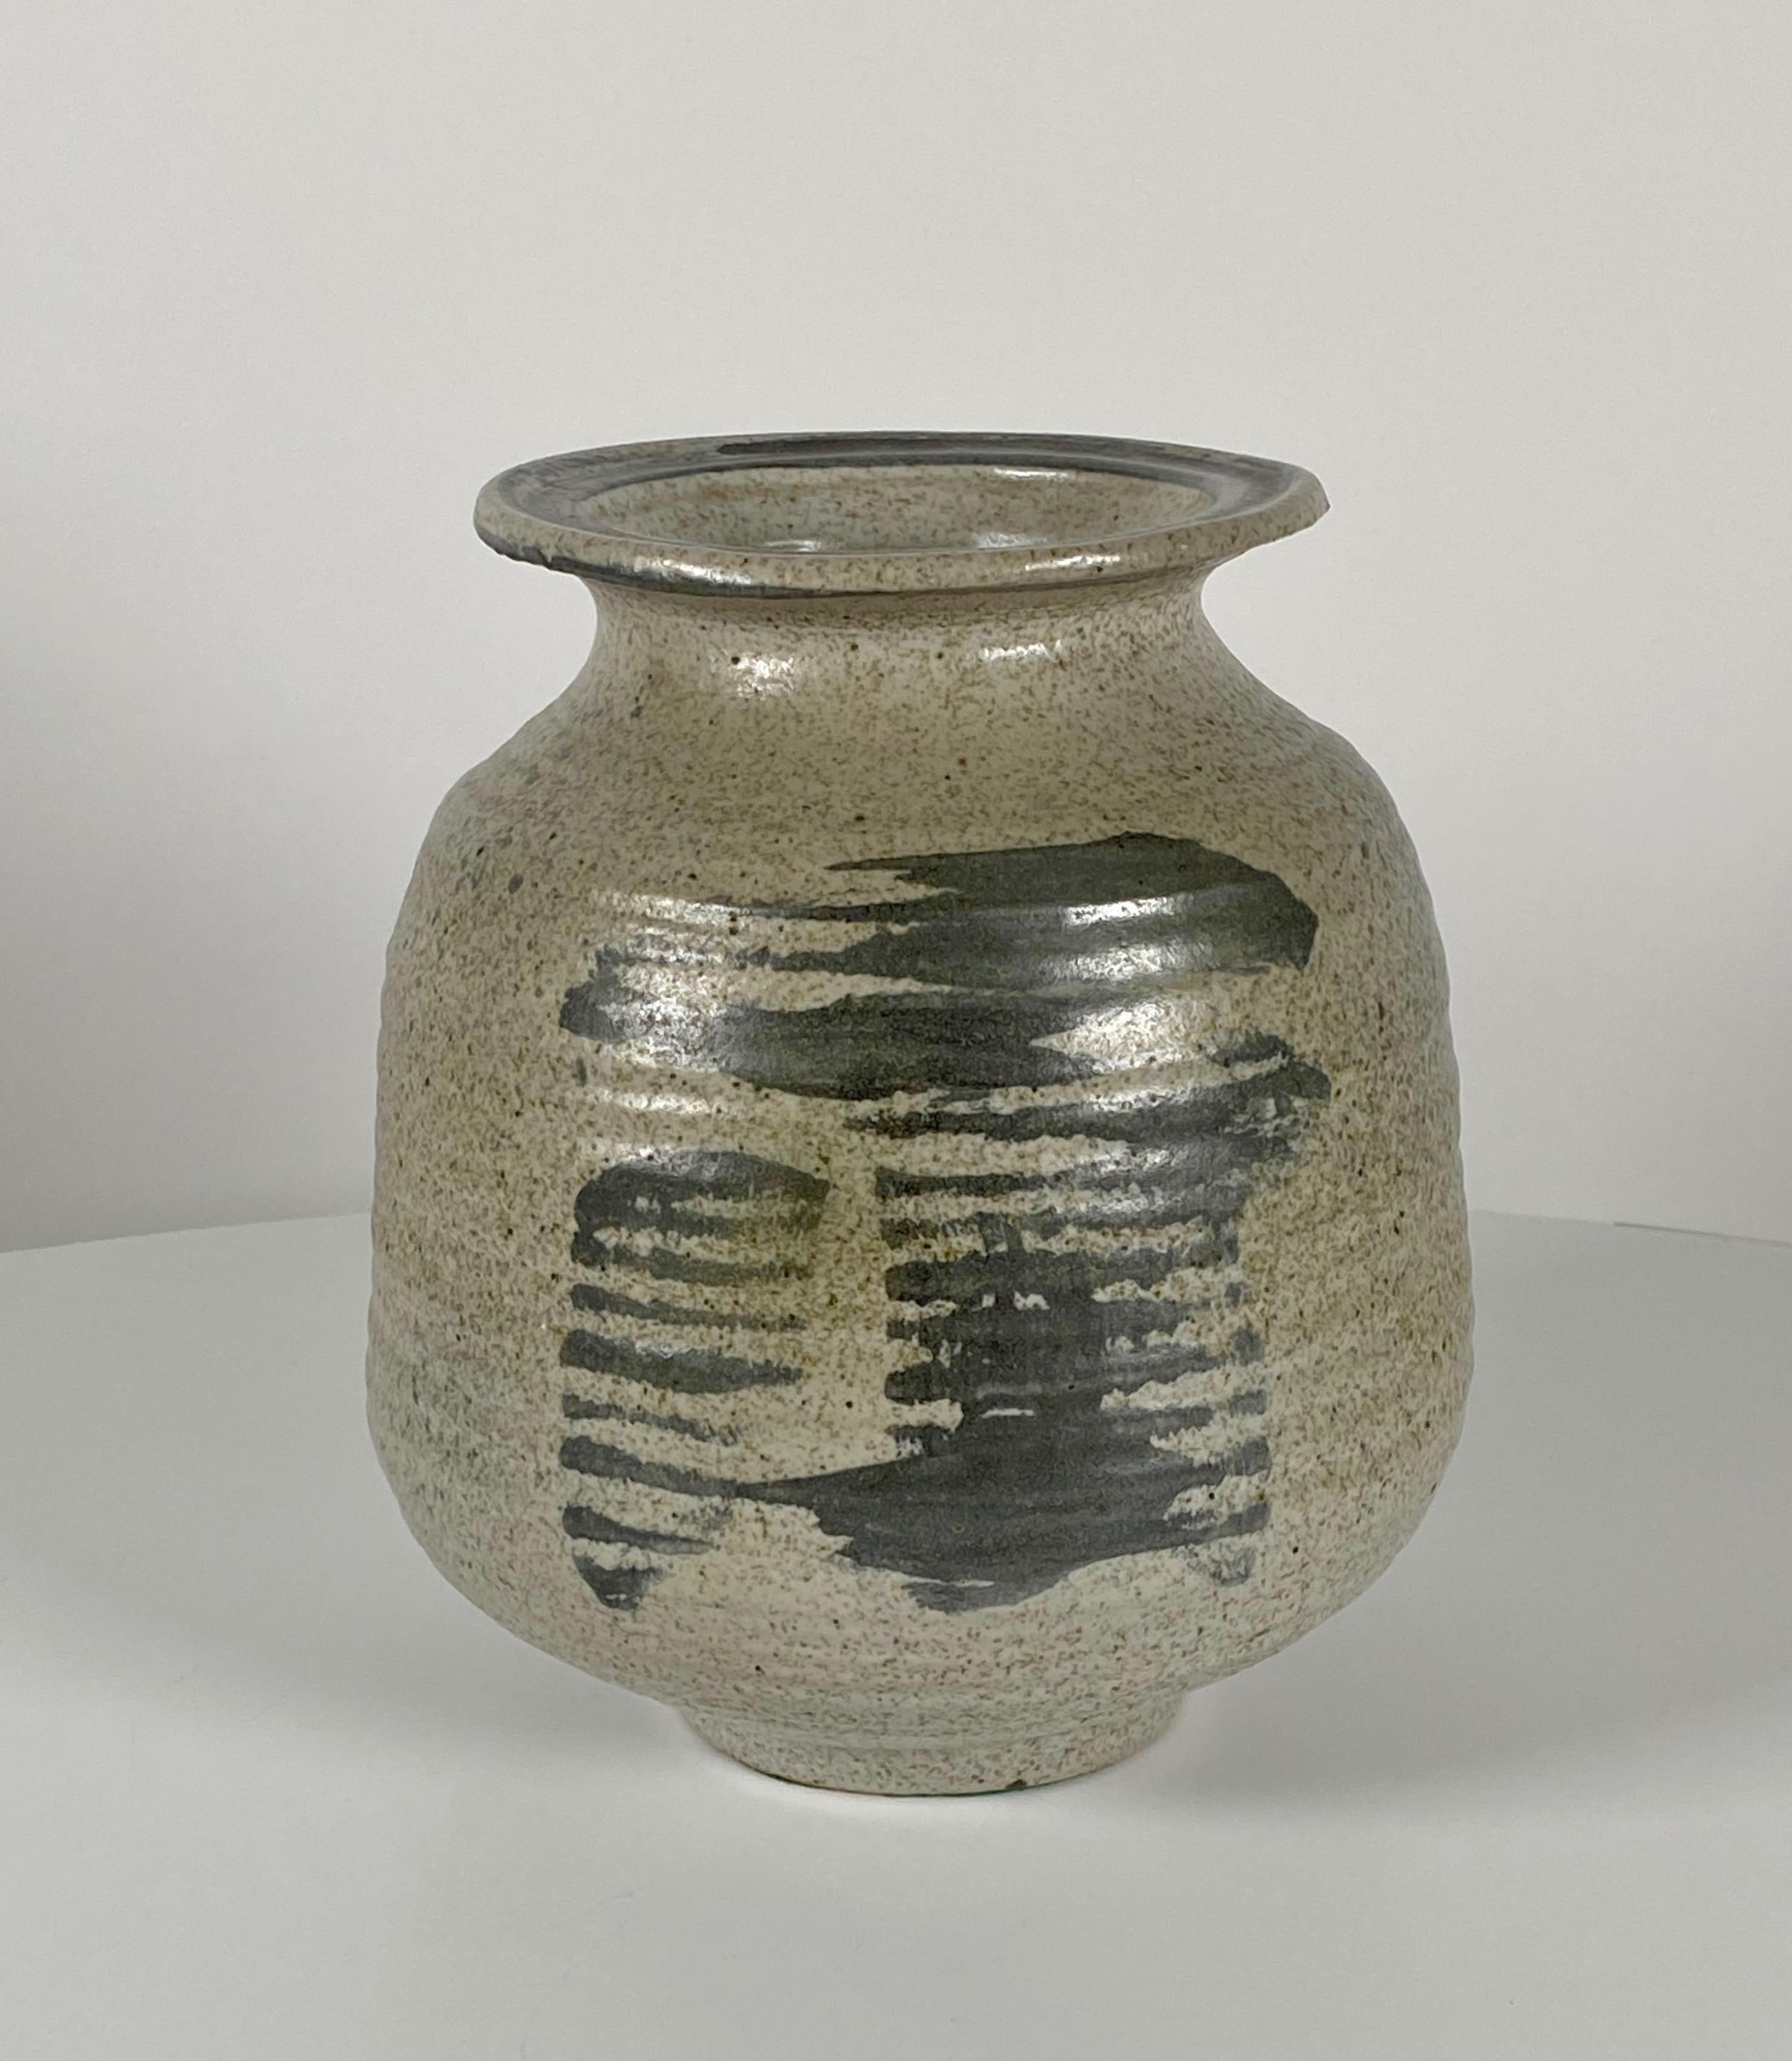 Ceramic vessel with glaze design embellishment by Bay Area potter Roy Walker, signed on bottom (1910-2006). Student of Glen Lukens, his work was influenced by the ceramic artists of Japan. Walker received many awards over his lifetime, had